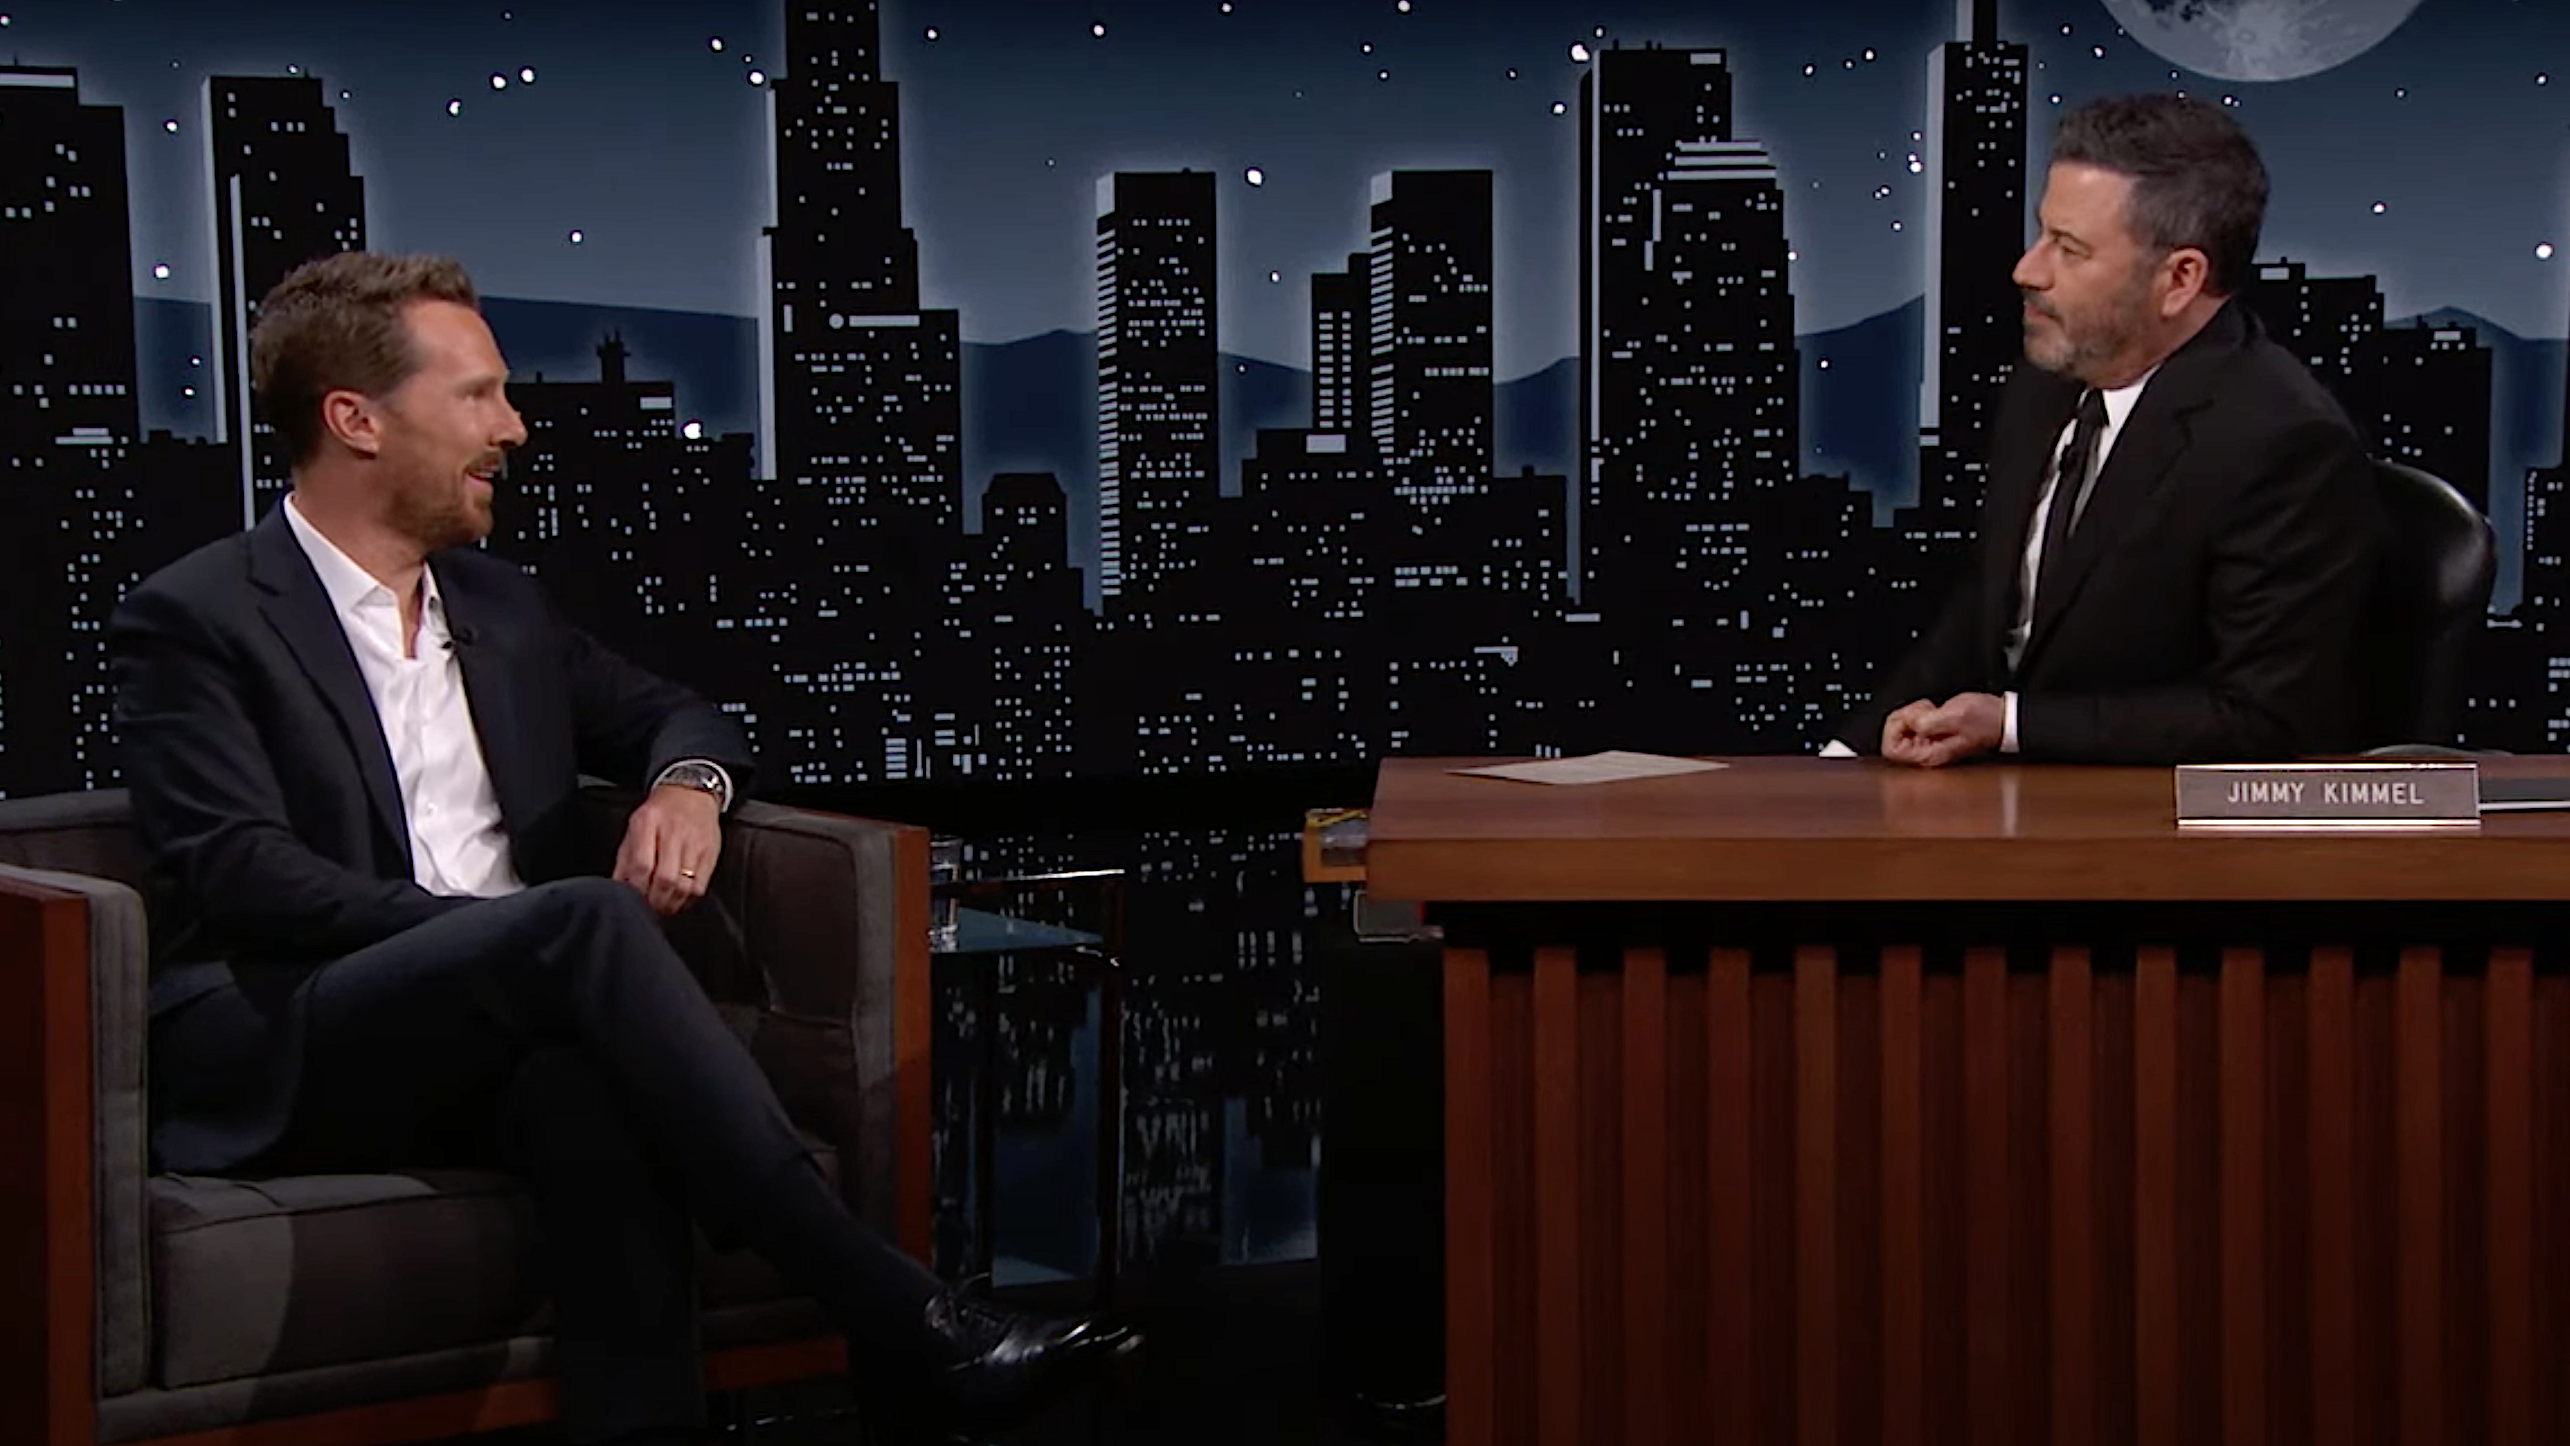 Benedict Cumberbatch won’t reveal MCU secrets to Jimmy Kimmel, but he will castrate your cows